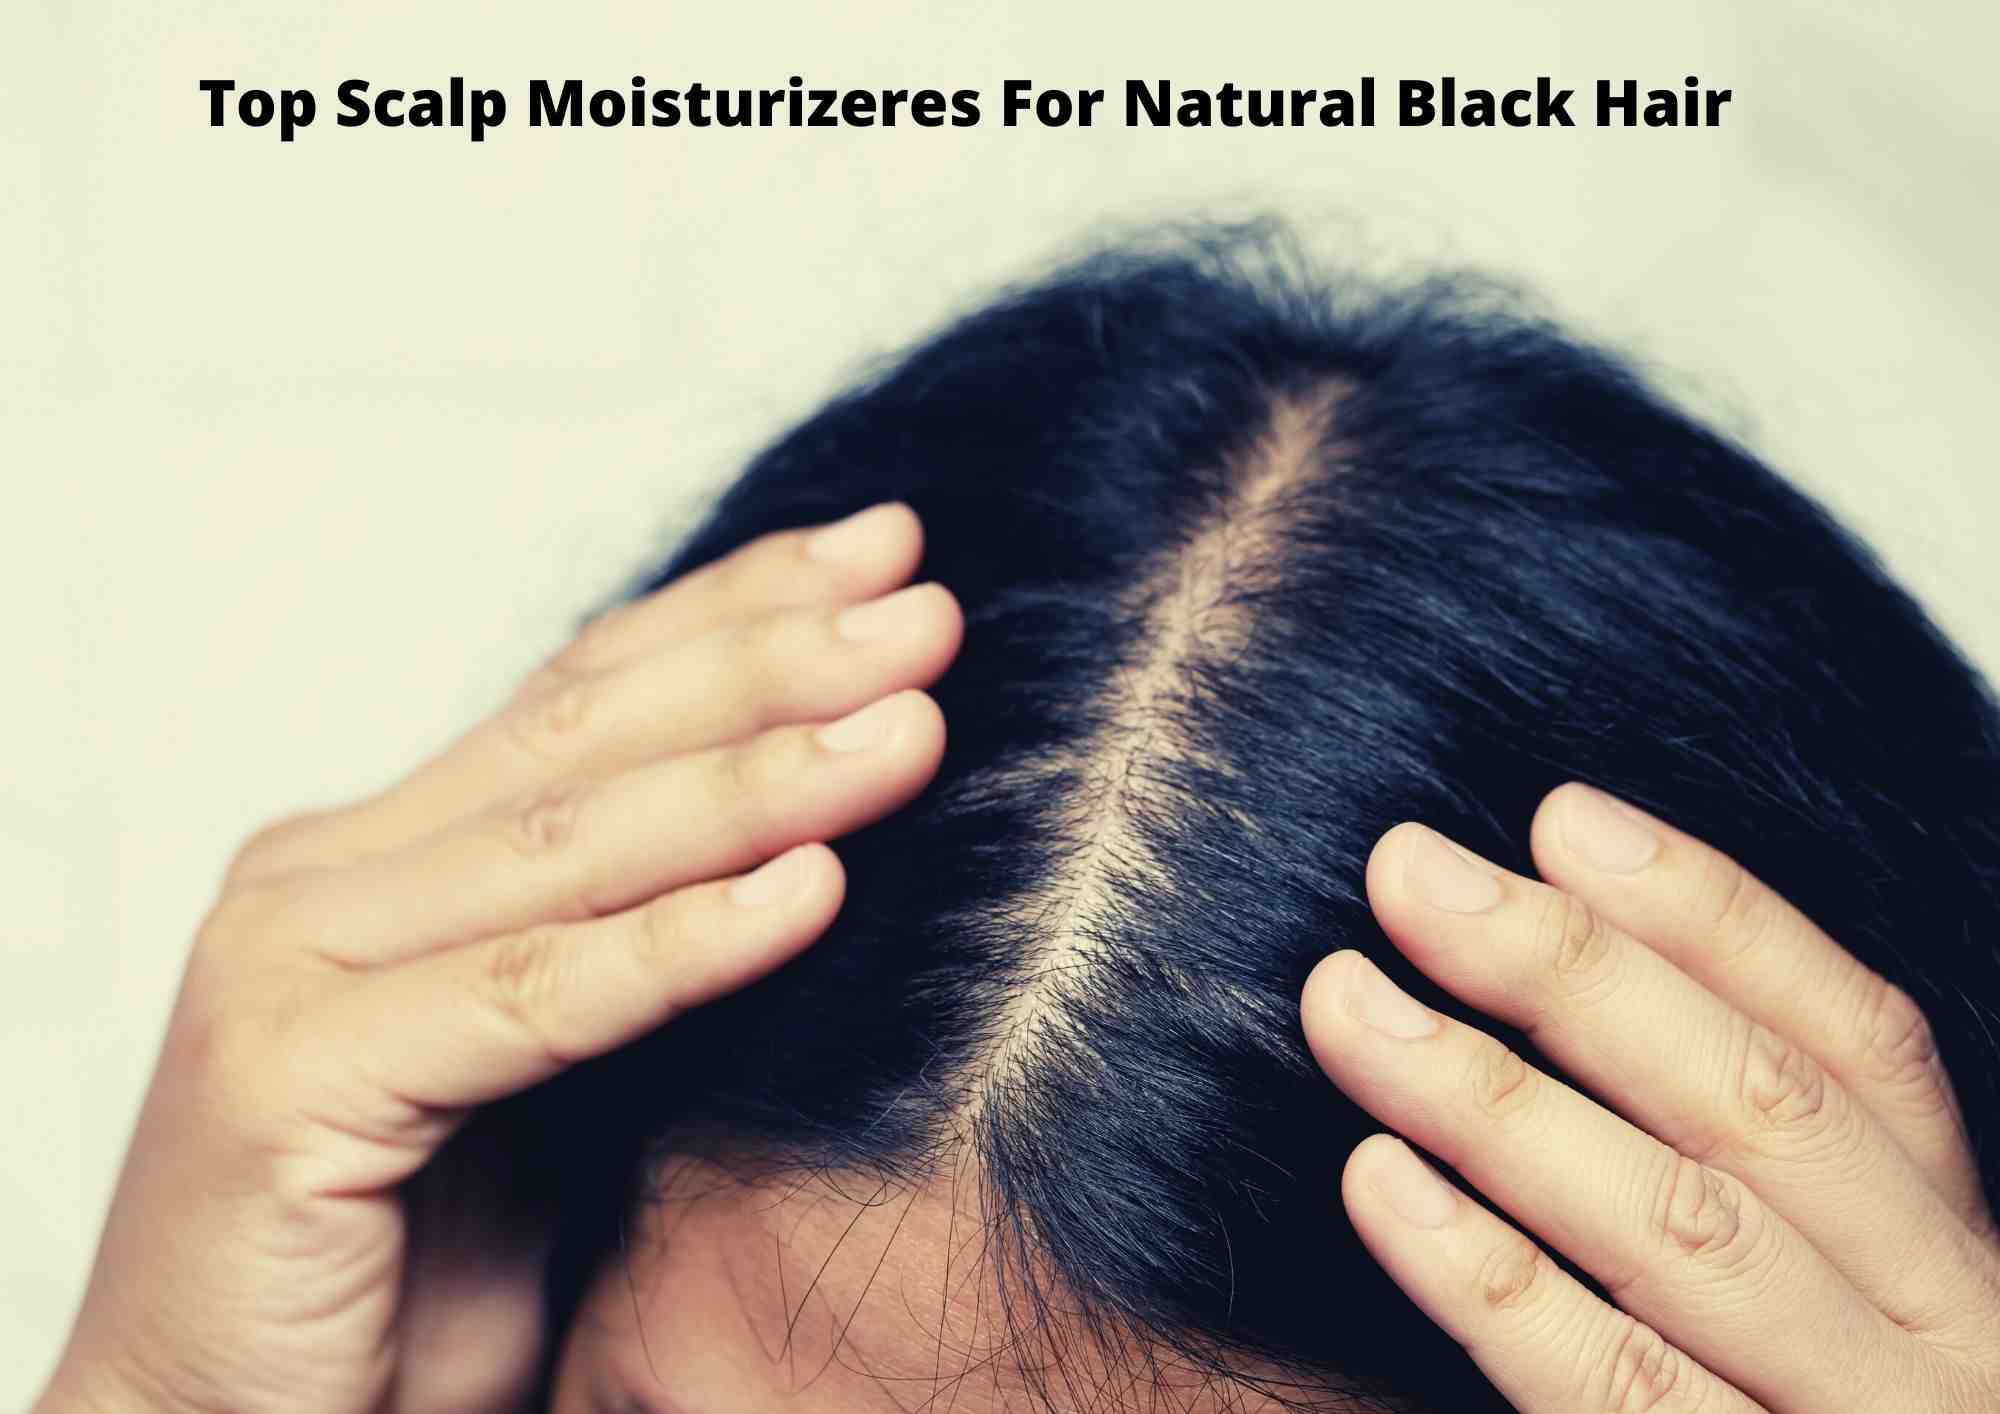 5 Best Scalp Moisturizers For Black Hair 2023 | For African American Hair  Types - Hair Everyday Review